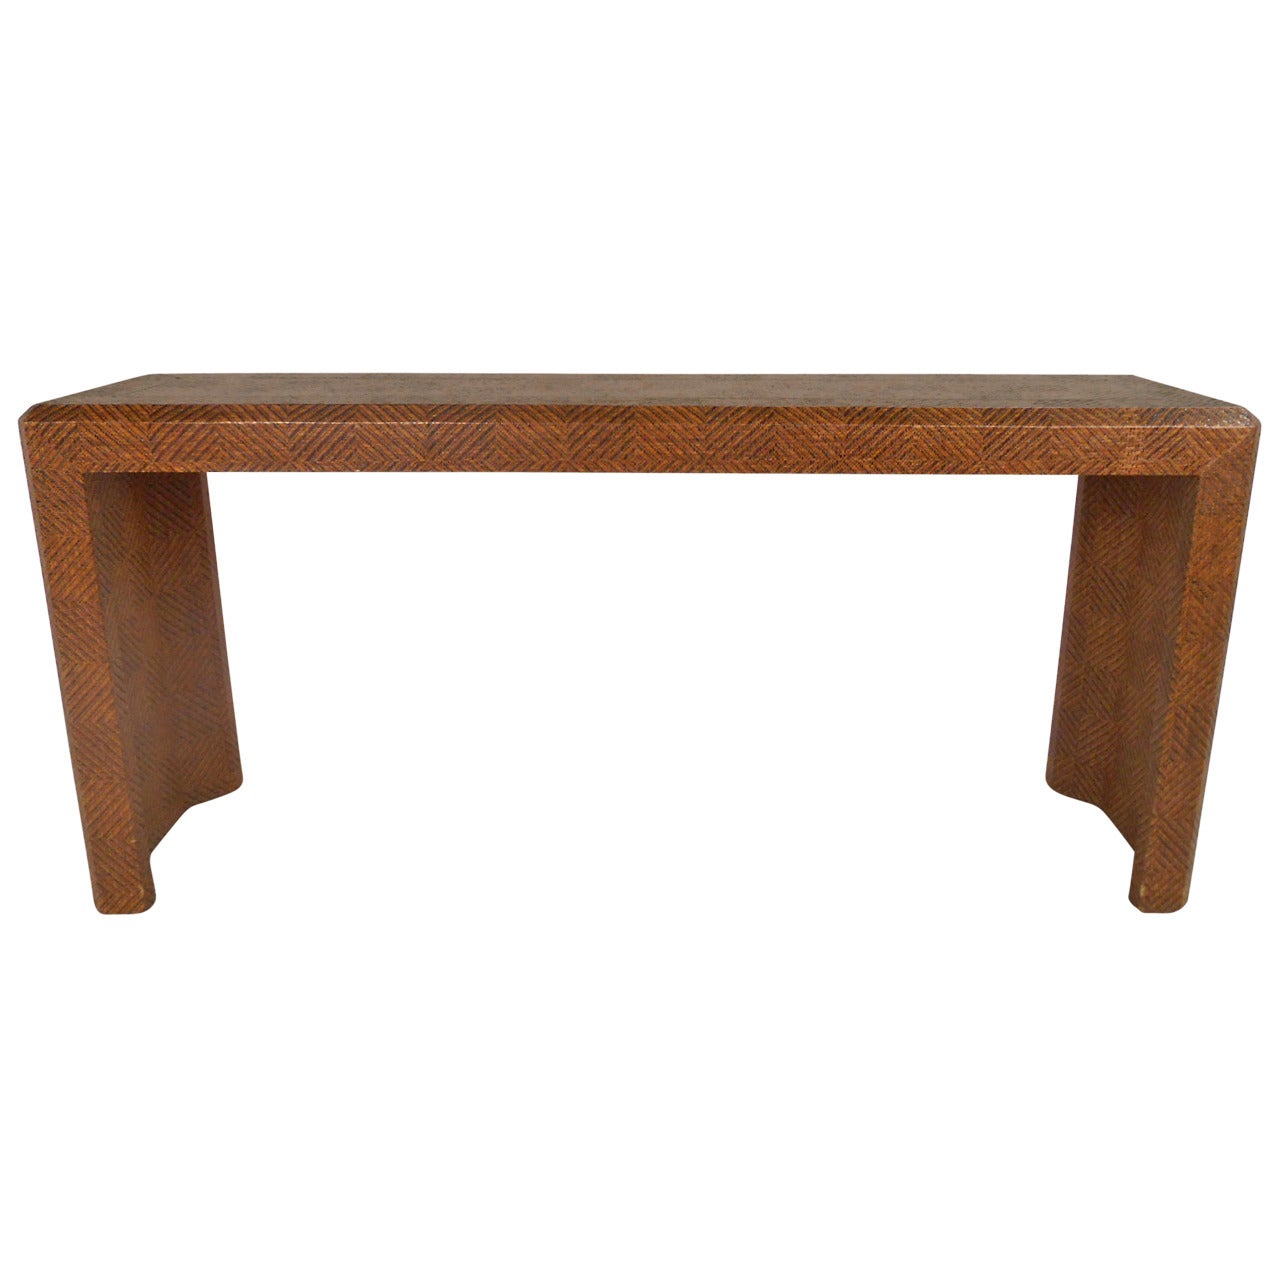 Mid-Century Modern Woven Cane Springer Style Console Table with Brass Inlay